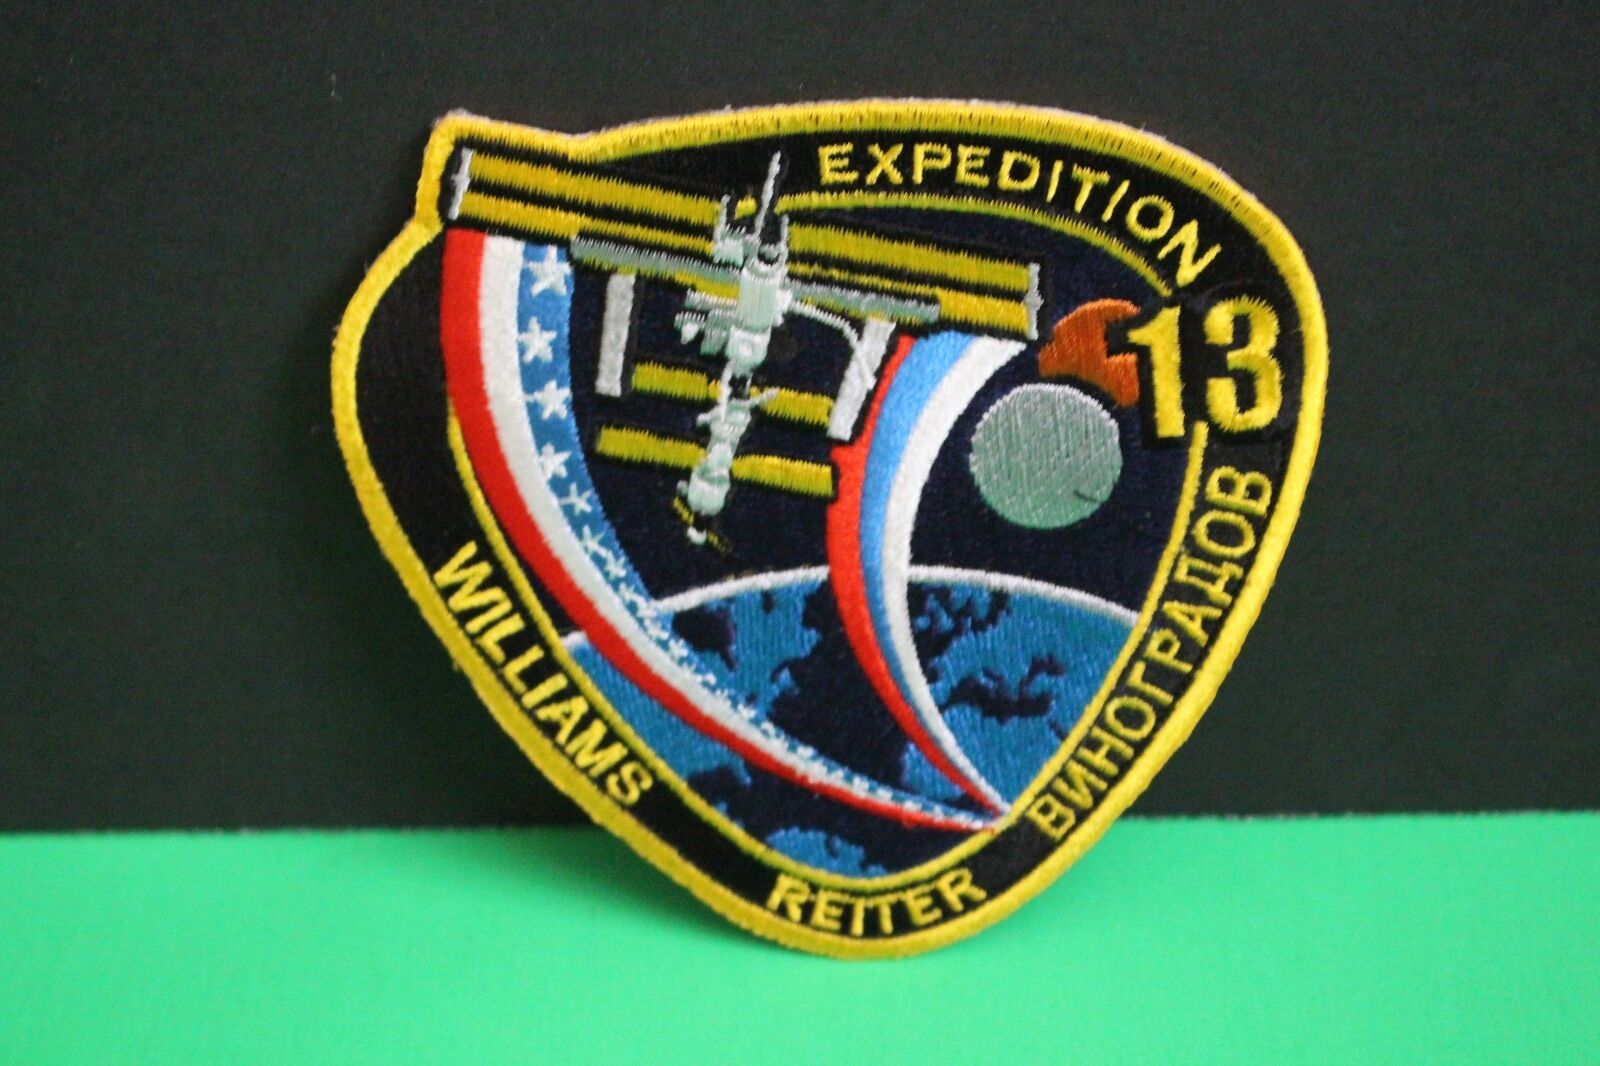 NASA EXPEDITION 13 PATCH INTERNATIONAL SPACE STATION WILLIAMS REITER 